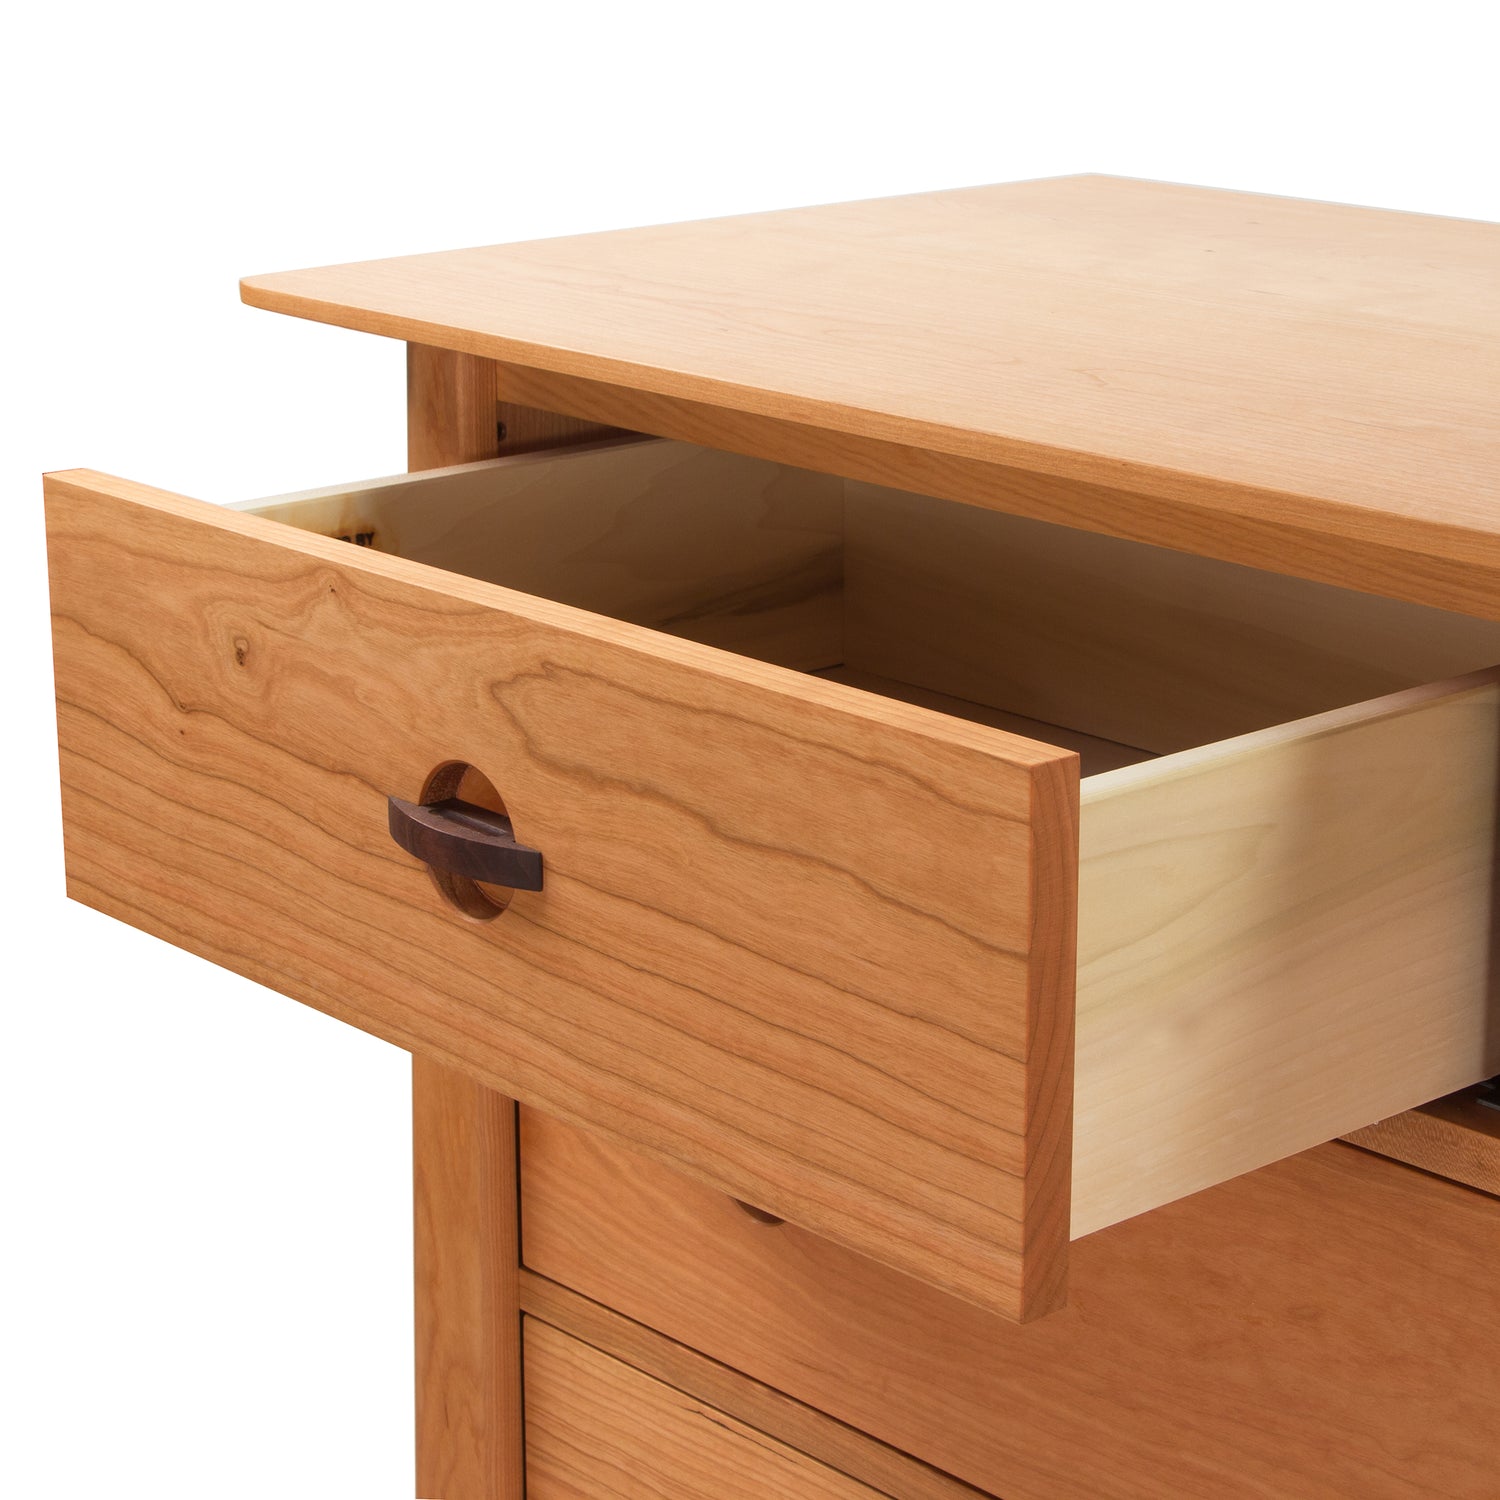 An eco-friendly, handmade wooden dresser with two drawers, the Maple Corner Woodworks Cherry Moon 7-Drawer Dresser.